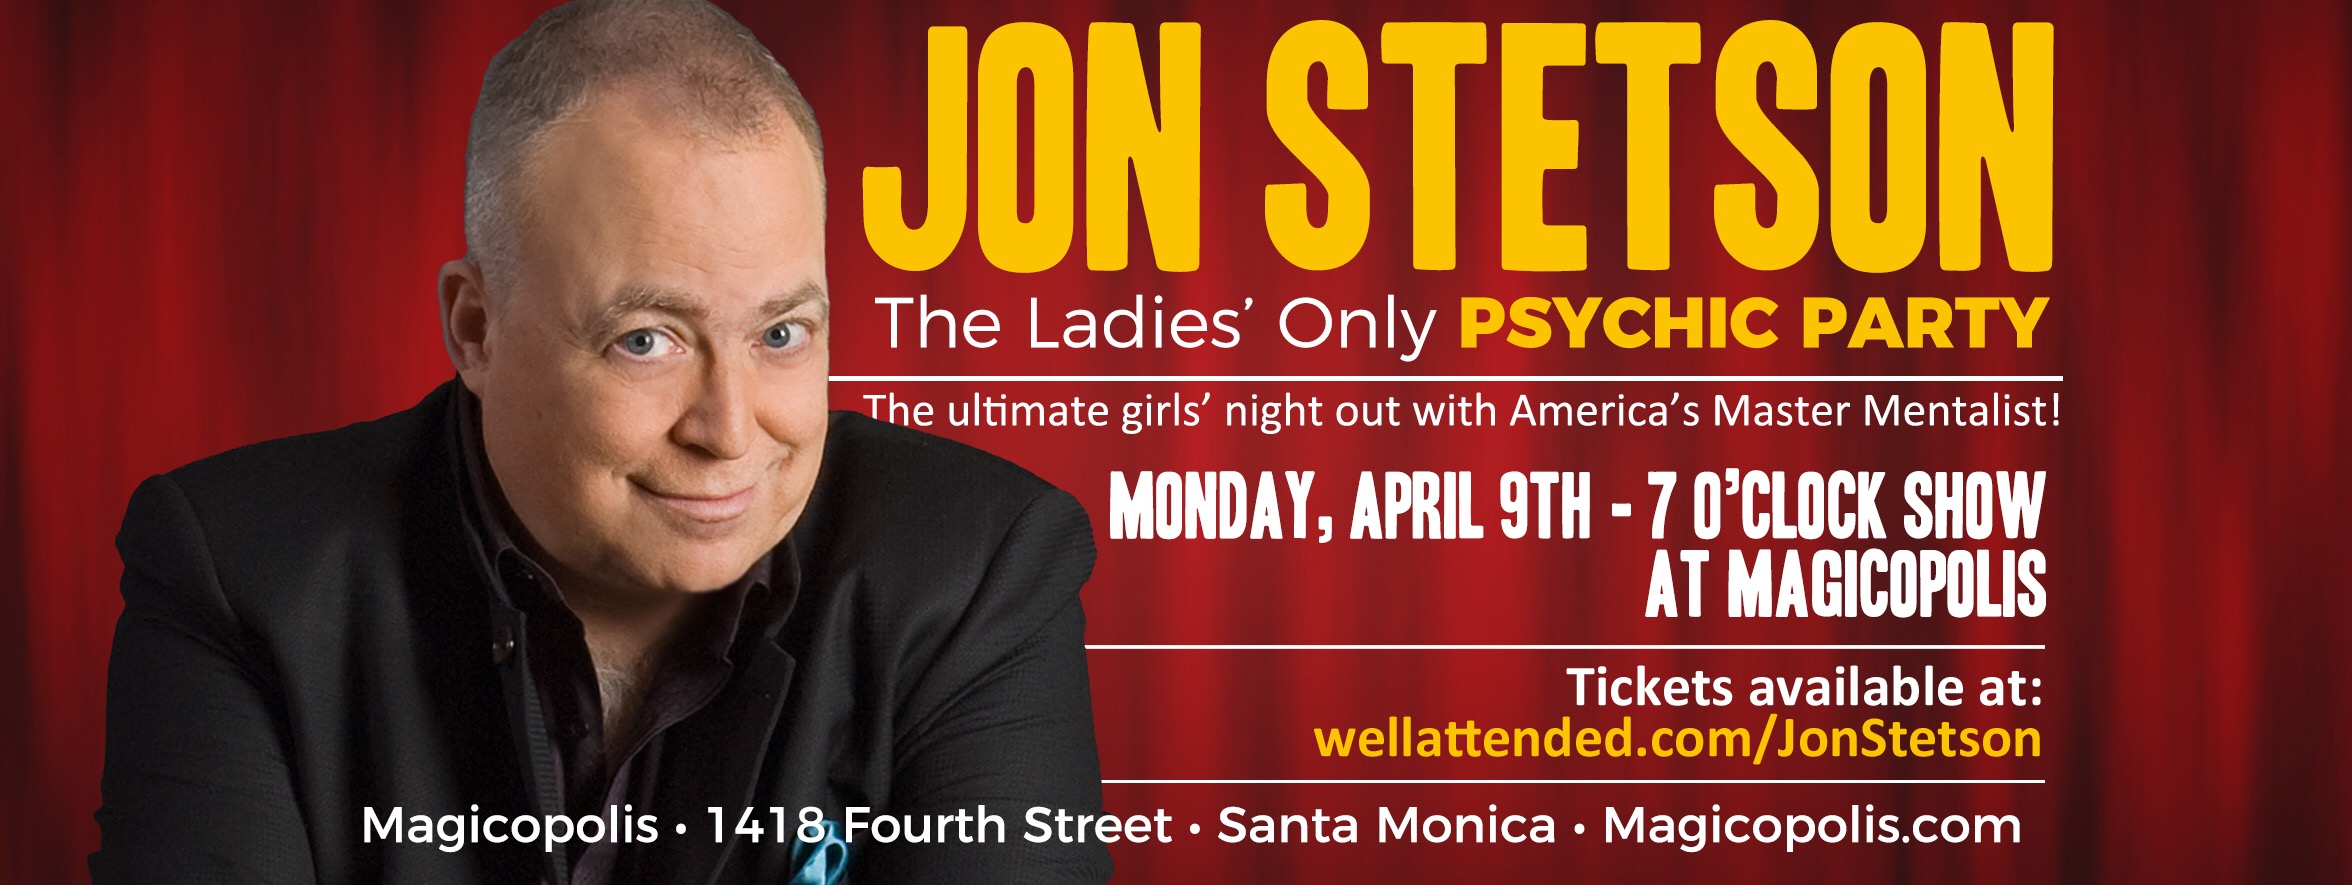 Jon Stetson's Ladies Only Psychic Party